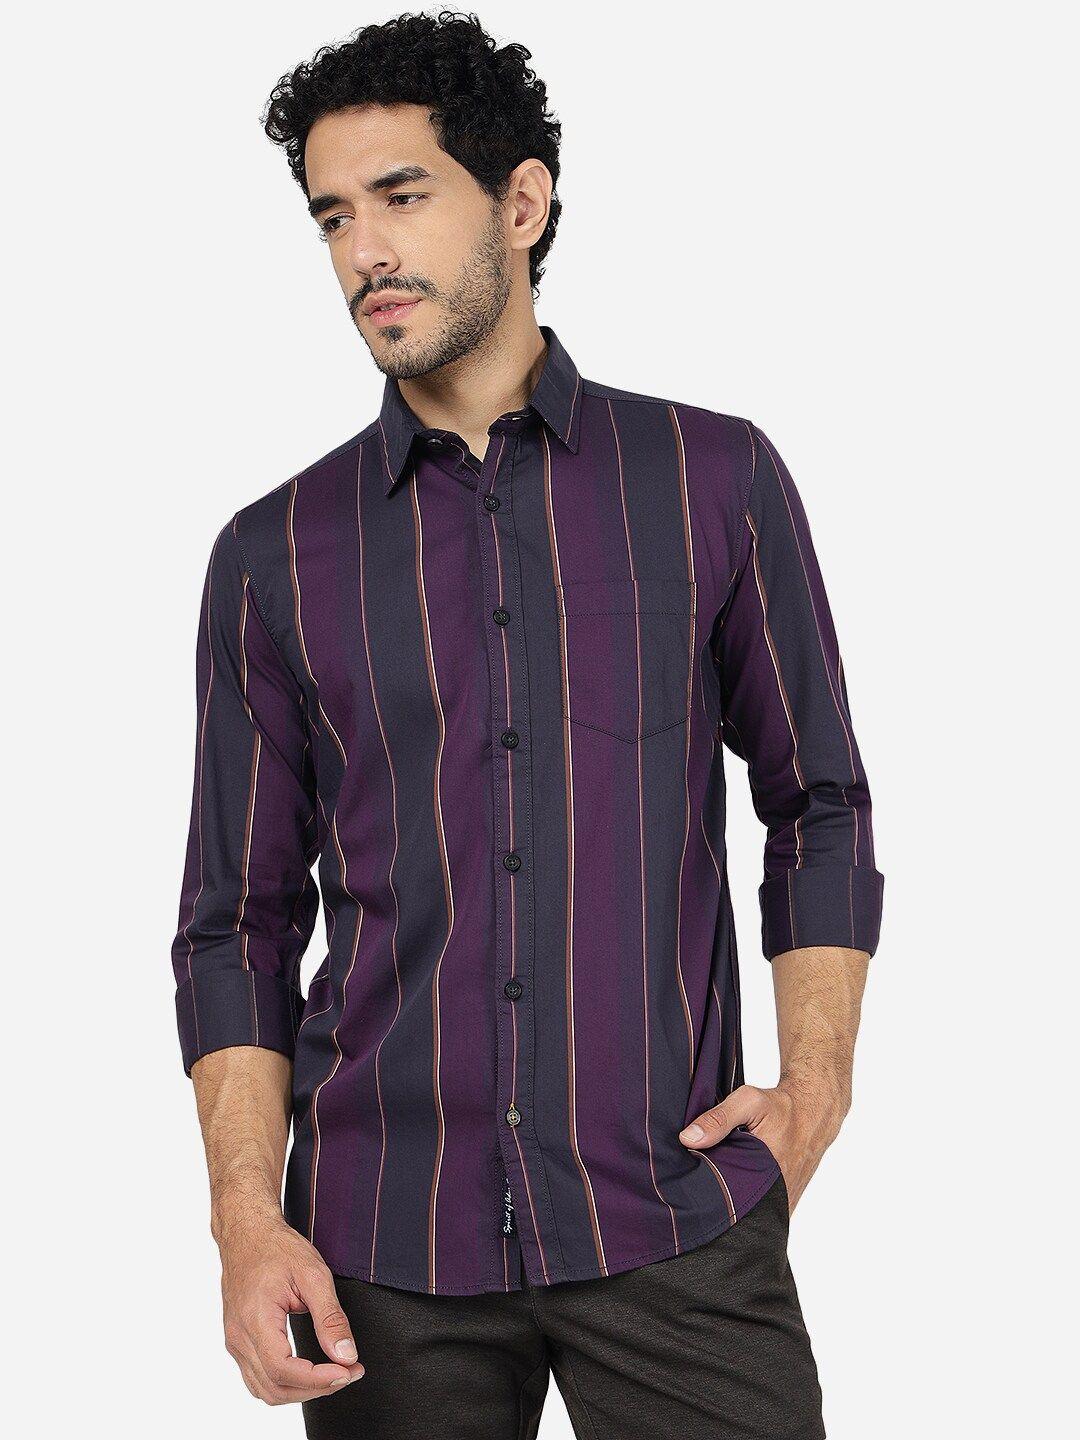 jade-blue-striped-cotton-slim-fit-opaque-casual-shirt